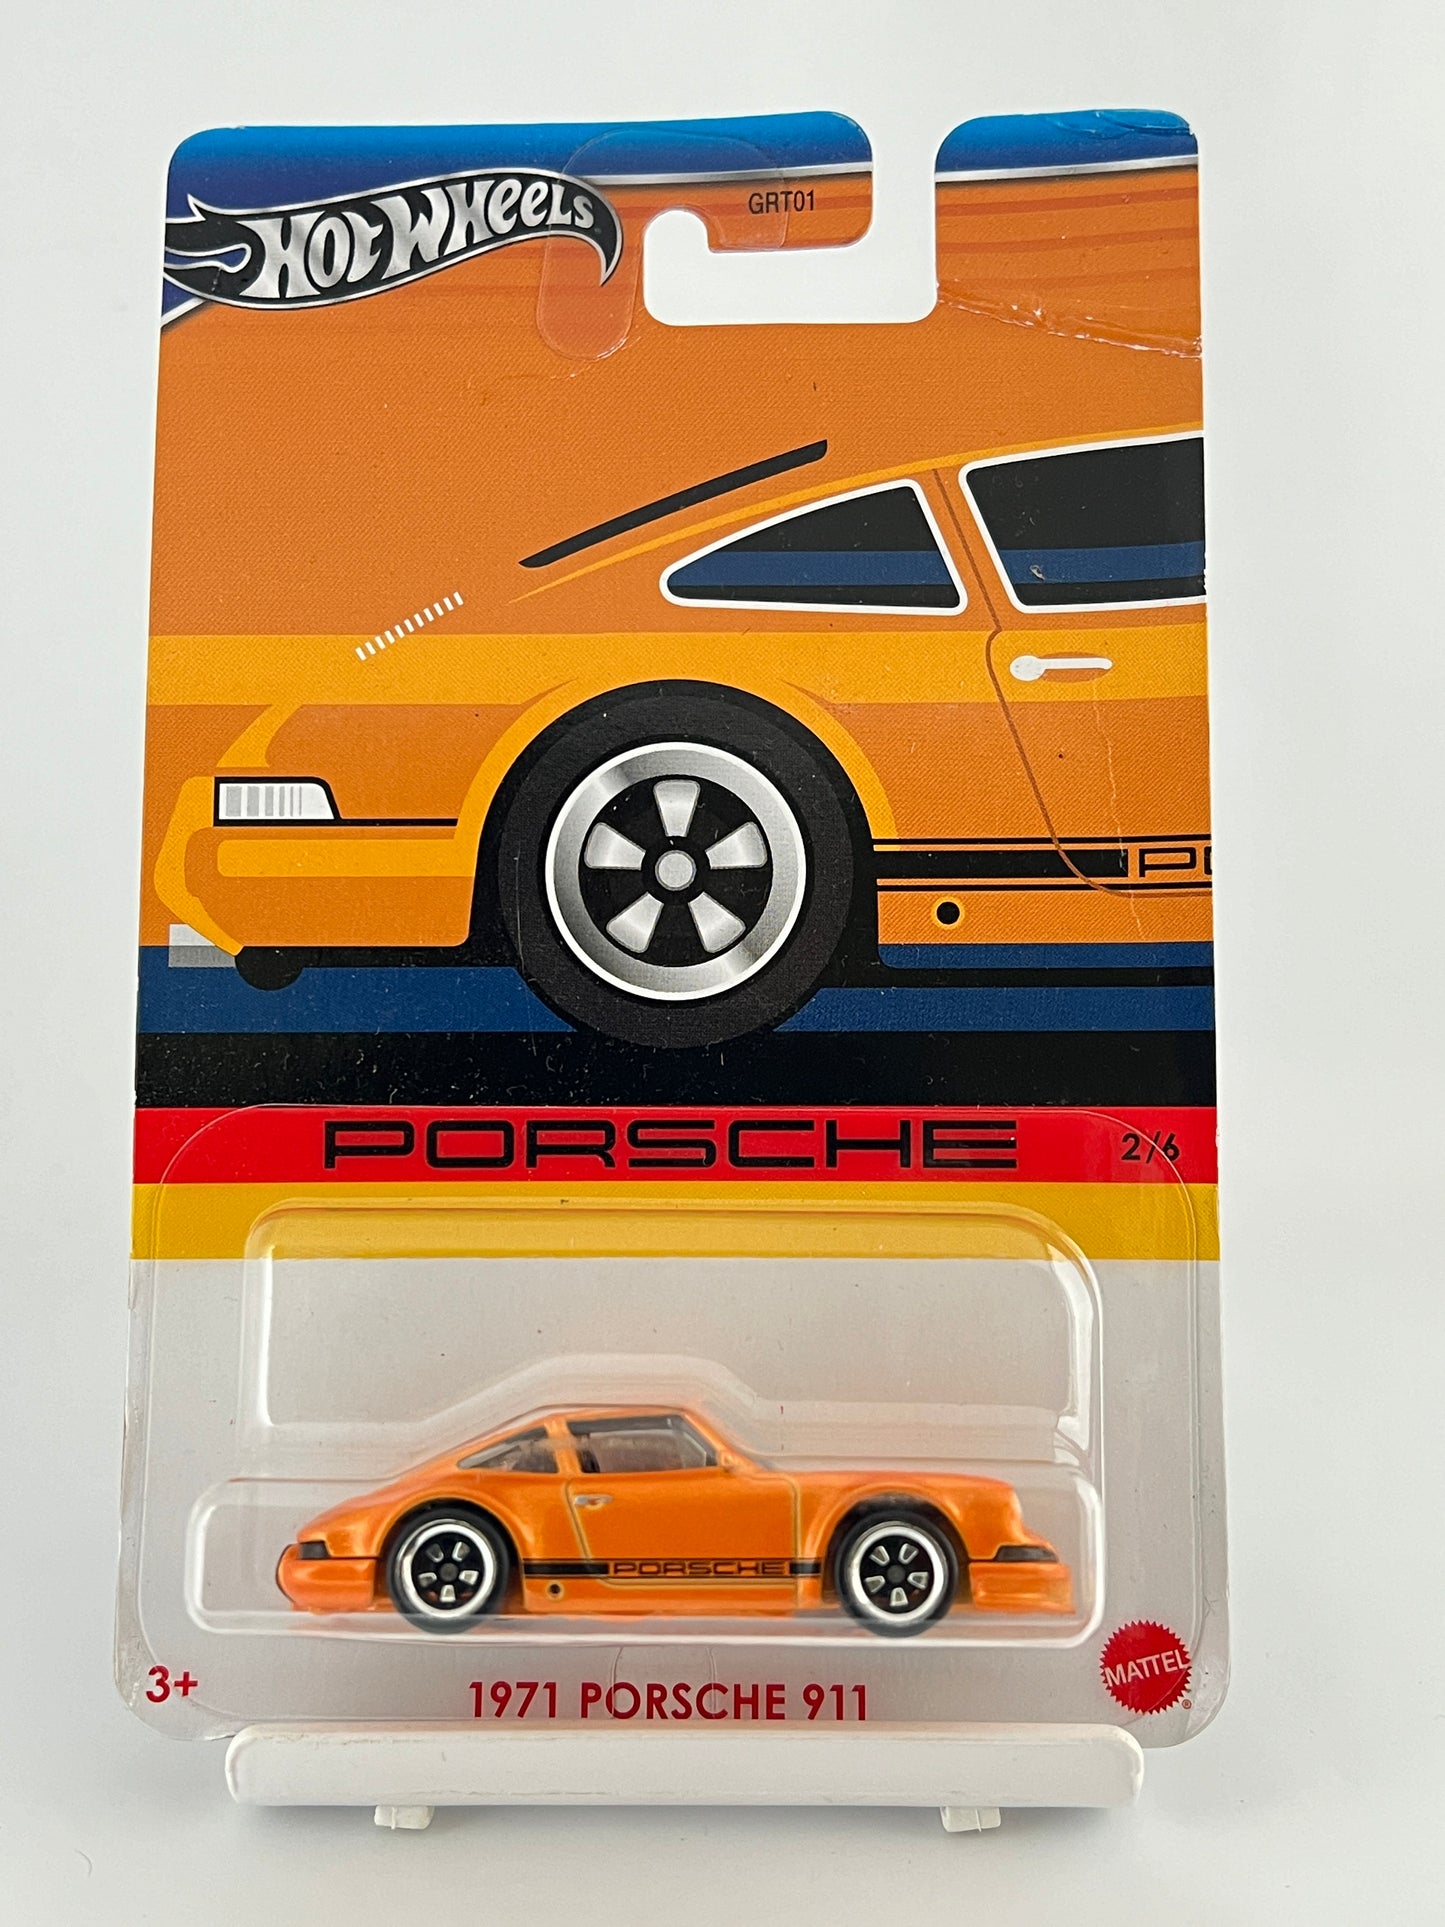 1971 PORSCHE 911 - IMPORTED - BENT AND CREASED CARD - 5D